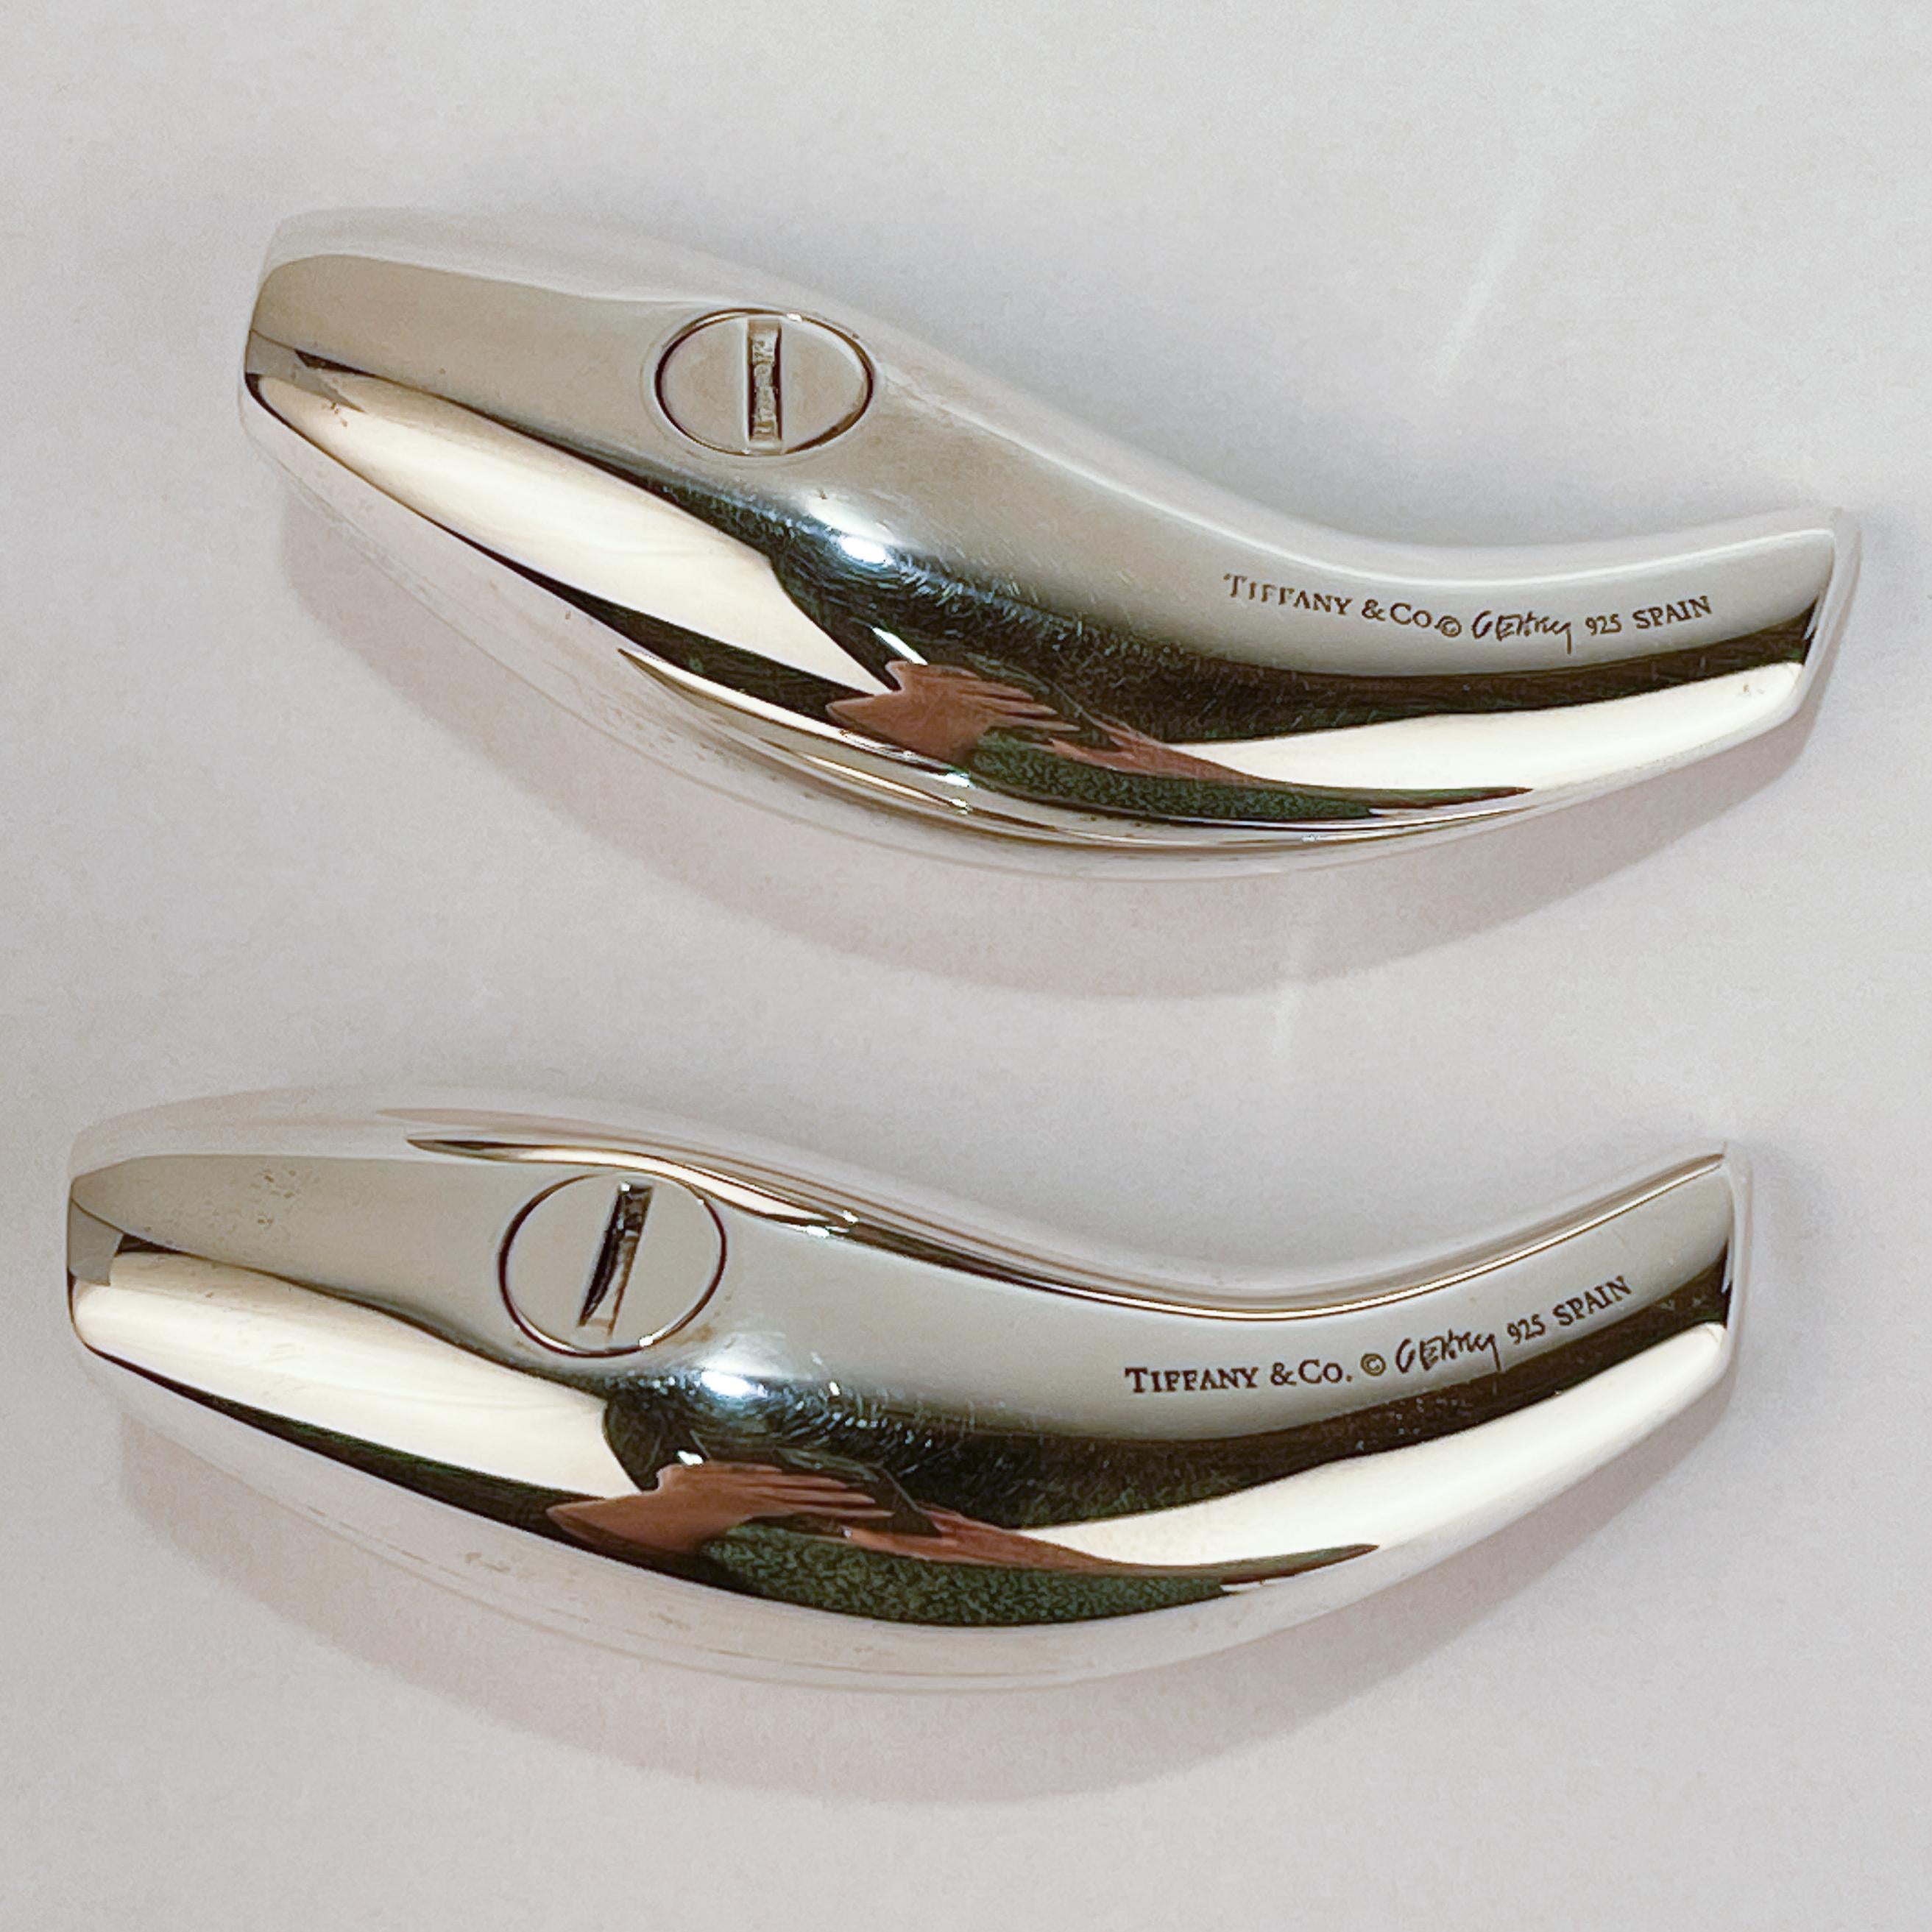 Tiffany & Co. Sterling Silver 'Fish' Salt & Pepper Shakers by Frank Gehry 3